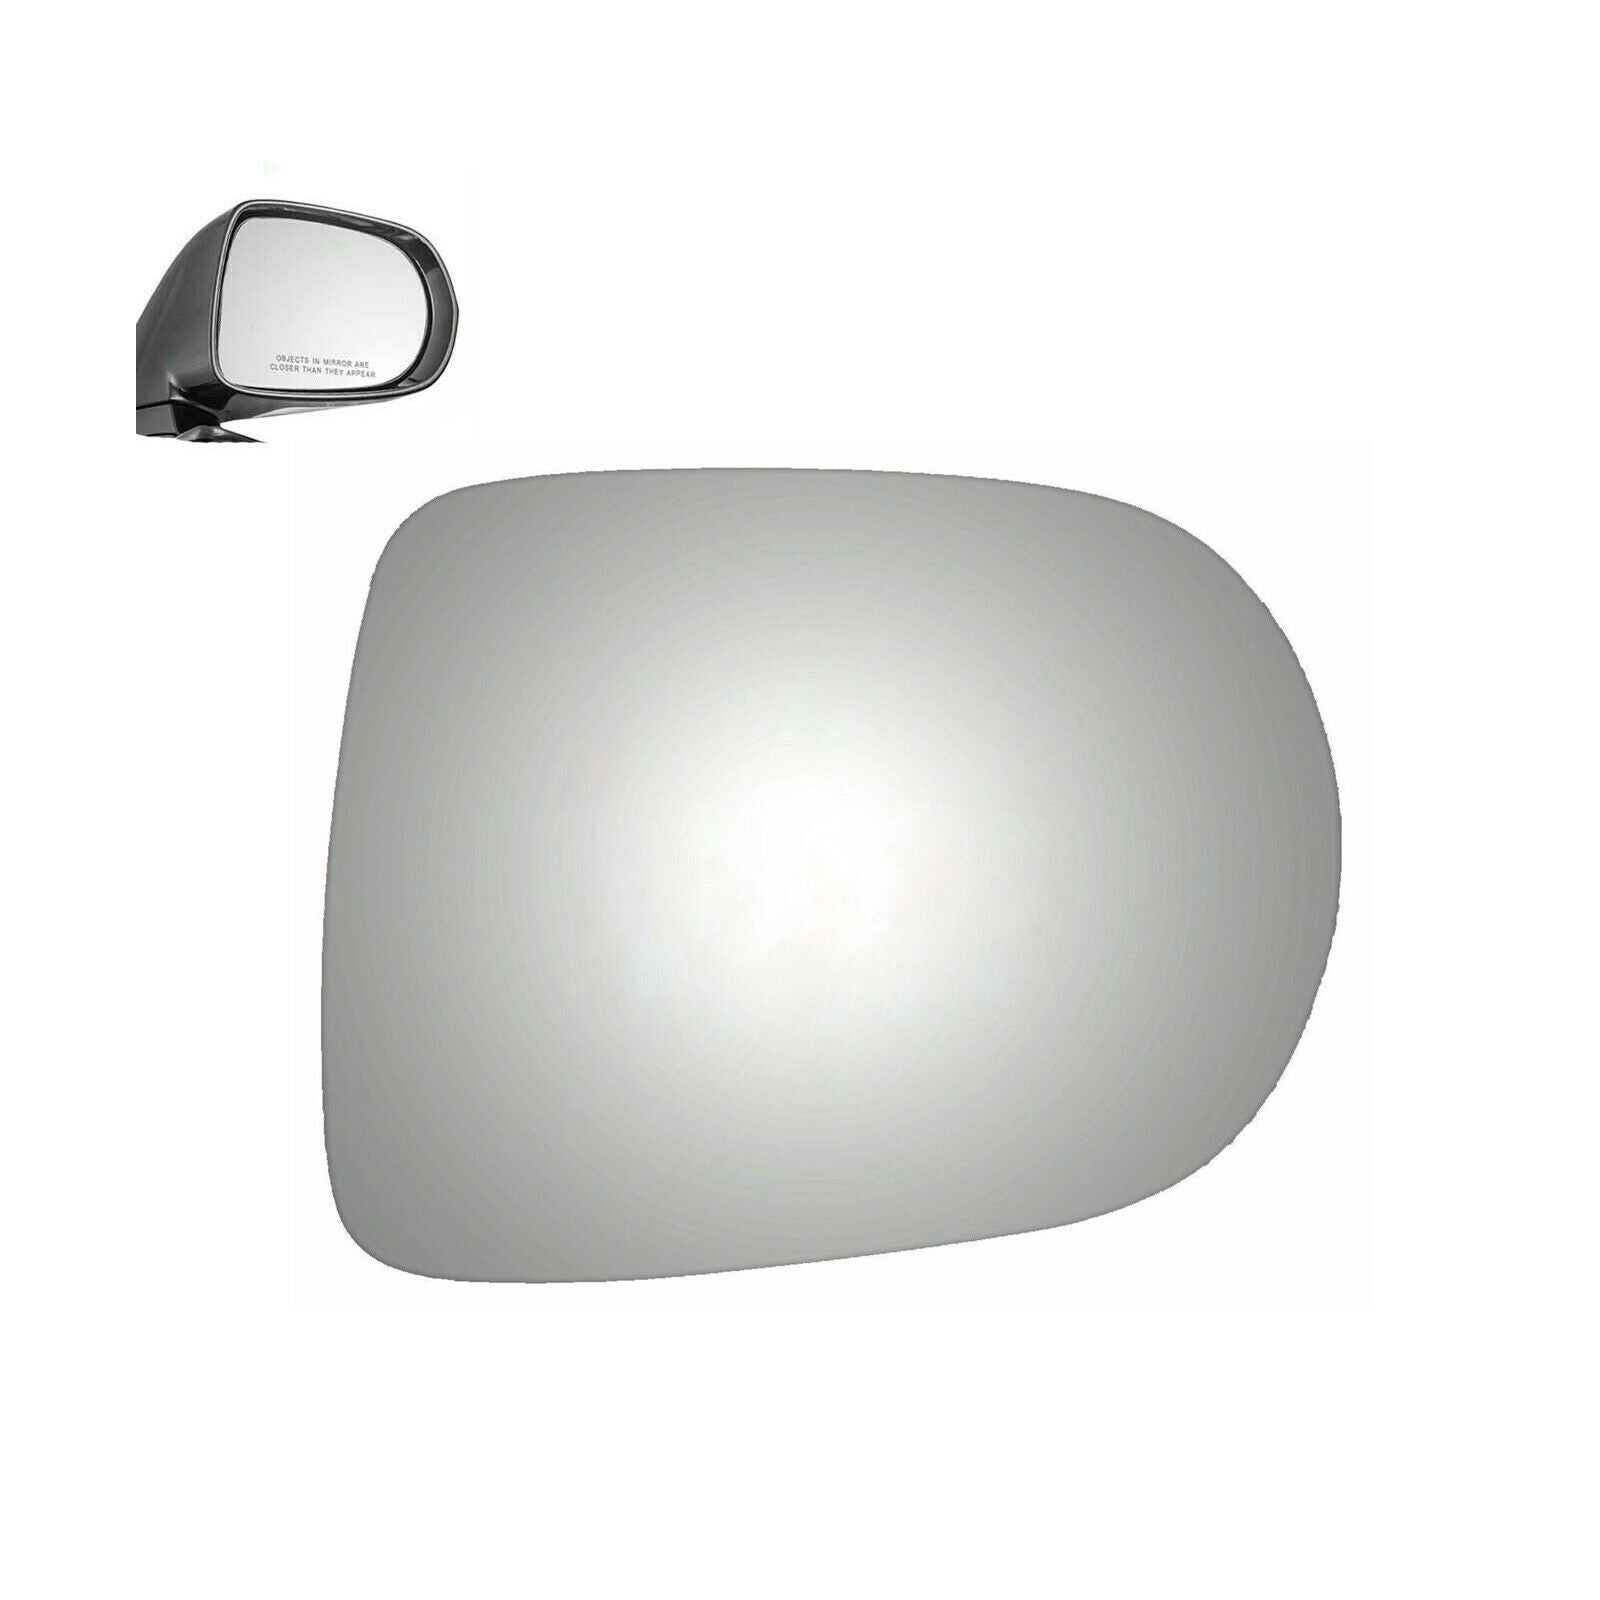 WLLW Replacement Mirror Glass for Lexus 2010-2015 RX350/RX450H, Driver Left Side LH/Passenger Right Side RH/The Both Sides Flat Convex M-0068